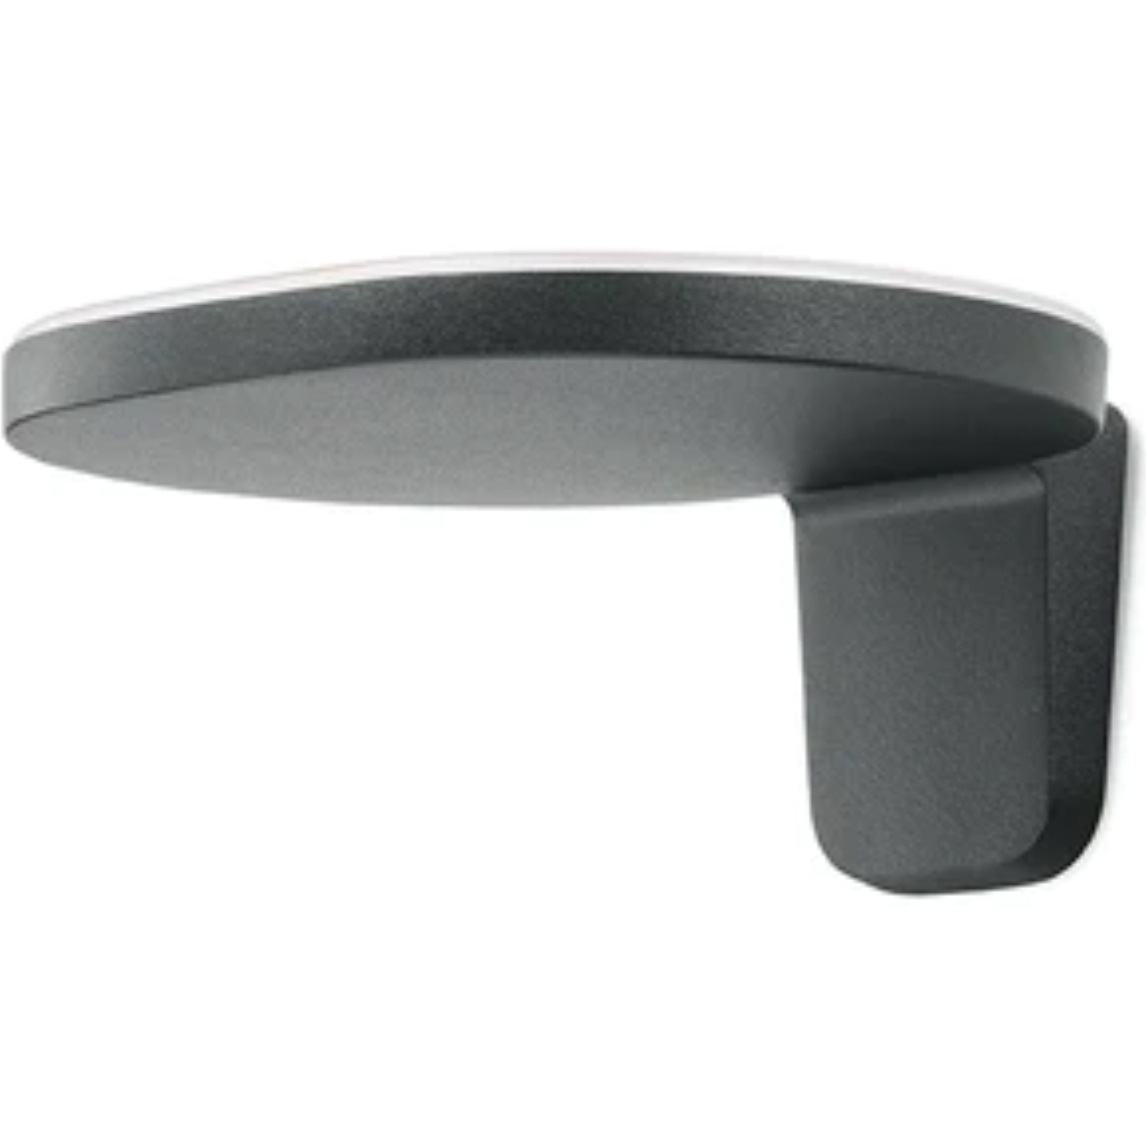 Oplight W2 Wall Lamp, Textured Anthracite